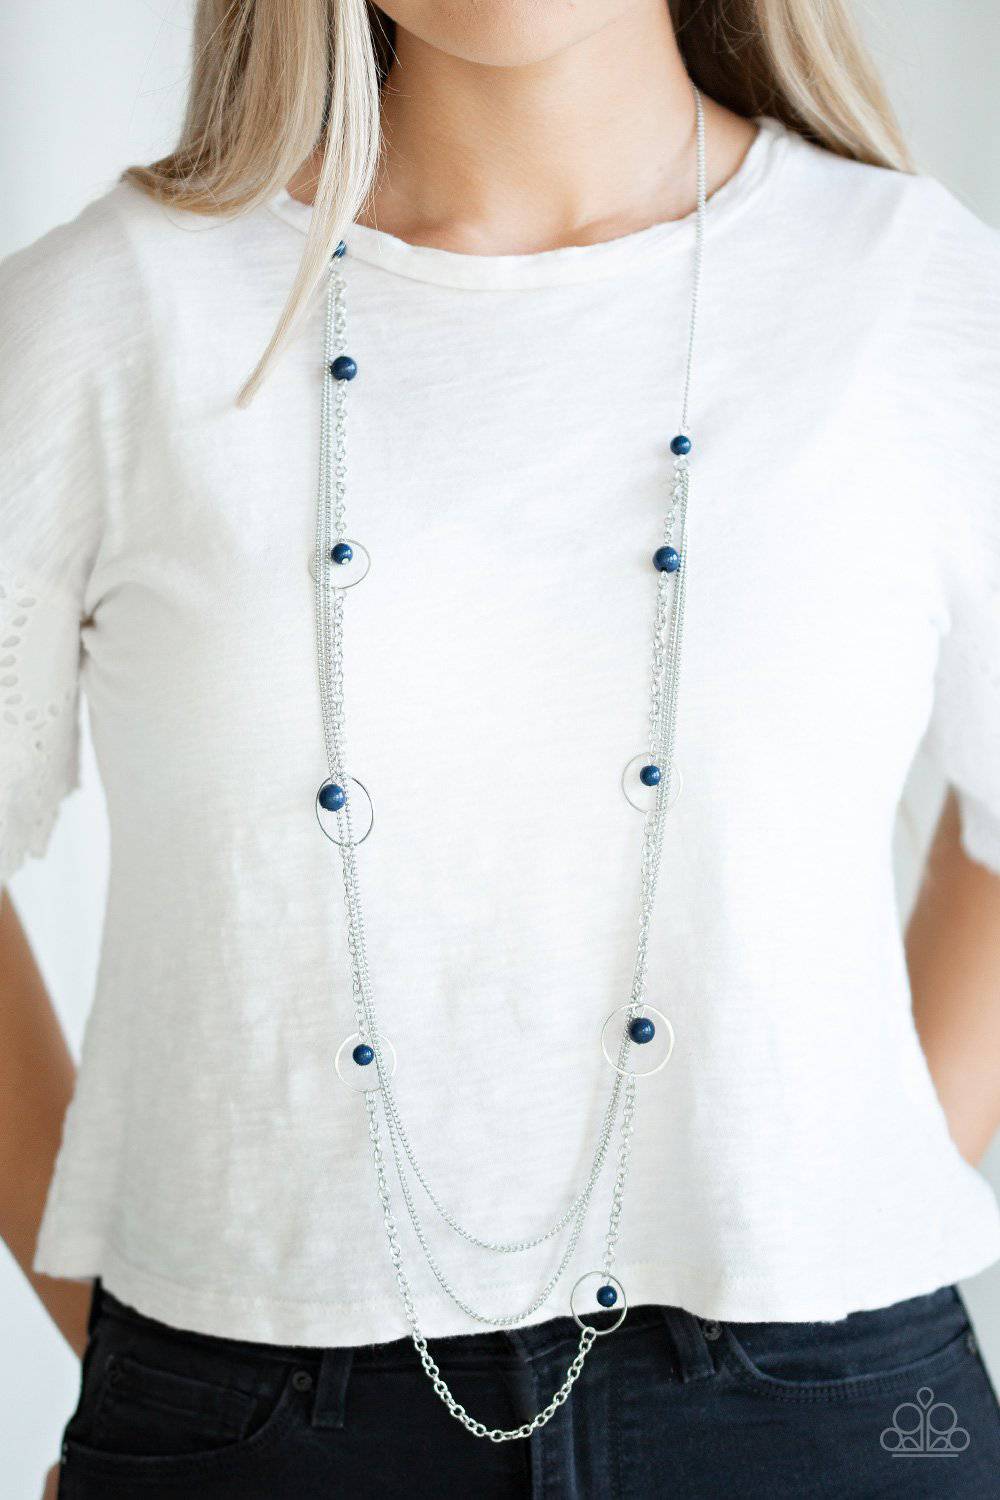 Collectively Carefree - Blue Bead Necklace - Paparazzi Accessories - GlaMarous Titi Jewels